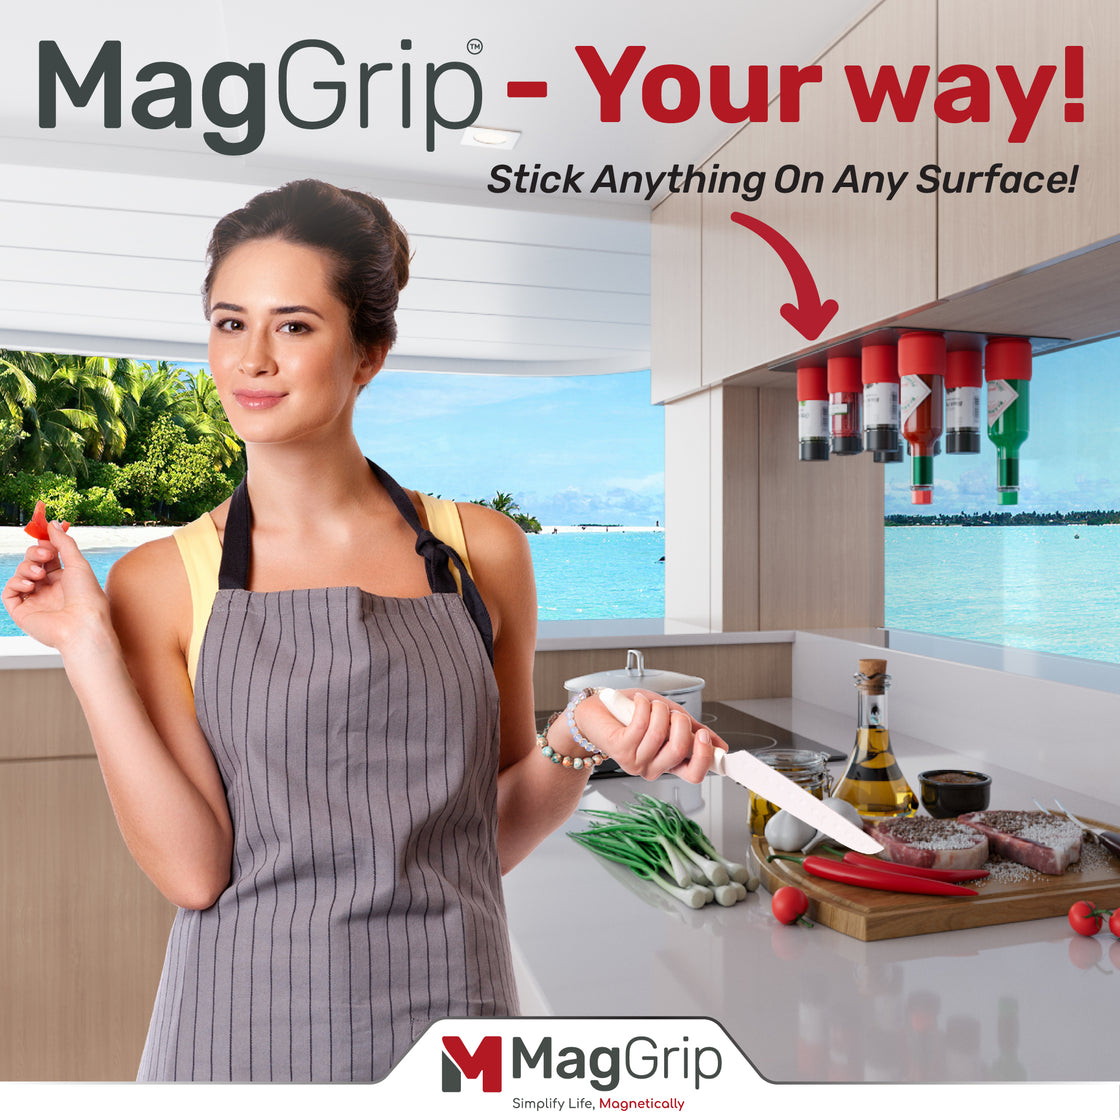 GripPlate Stainless Steel Plate for MagGrip Spice Jar Grips